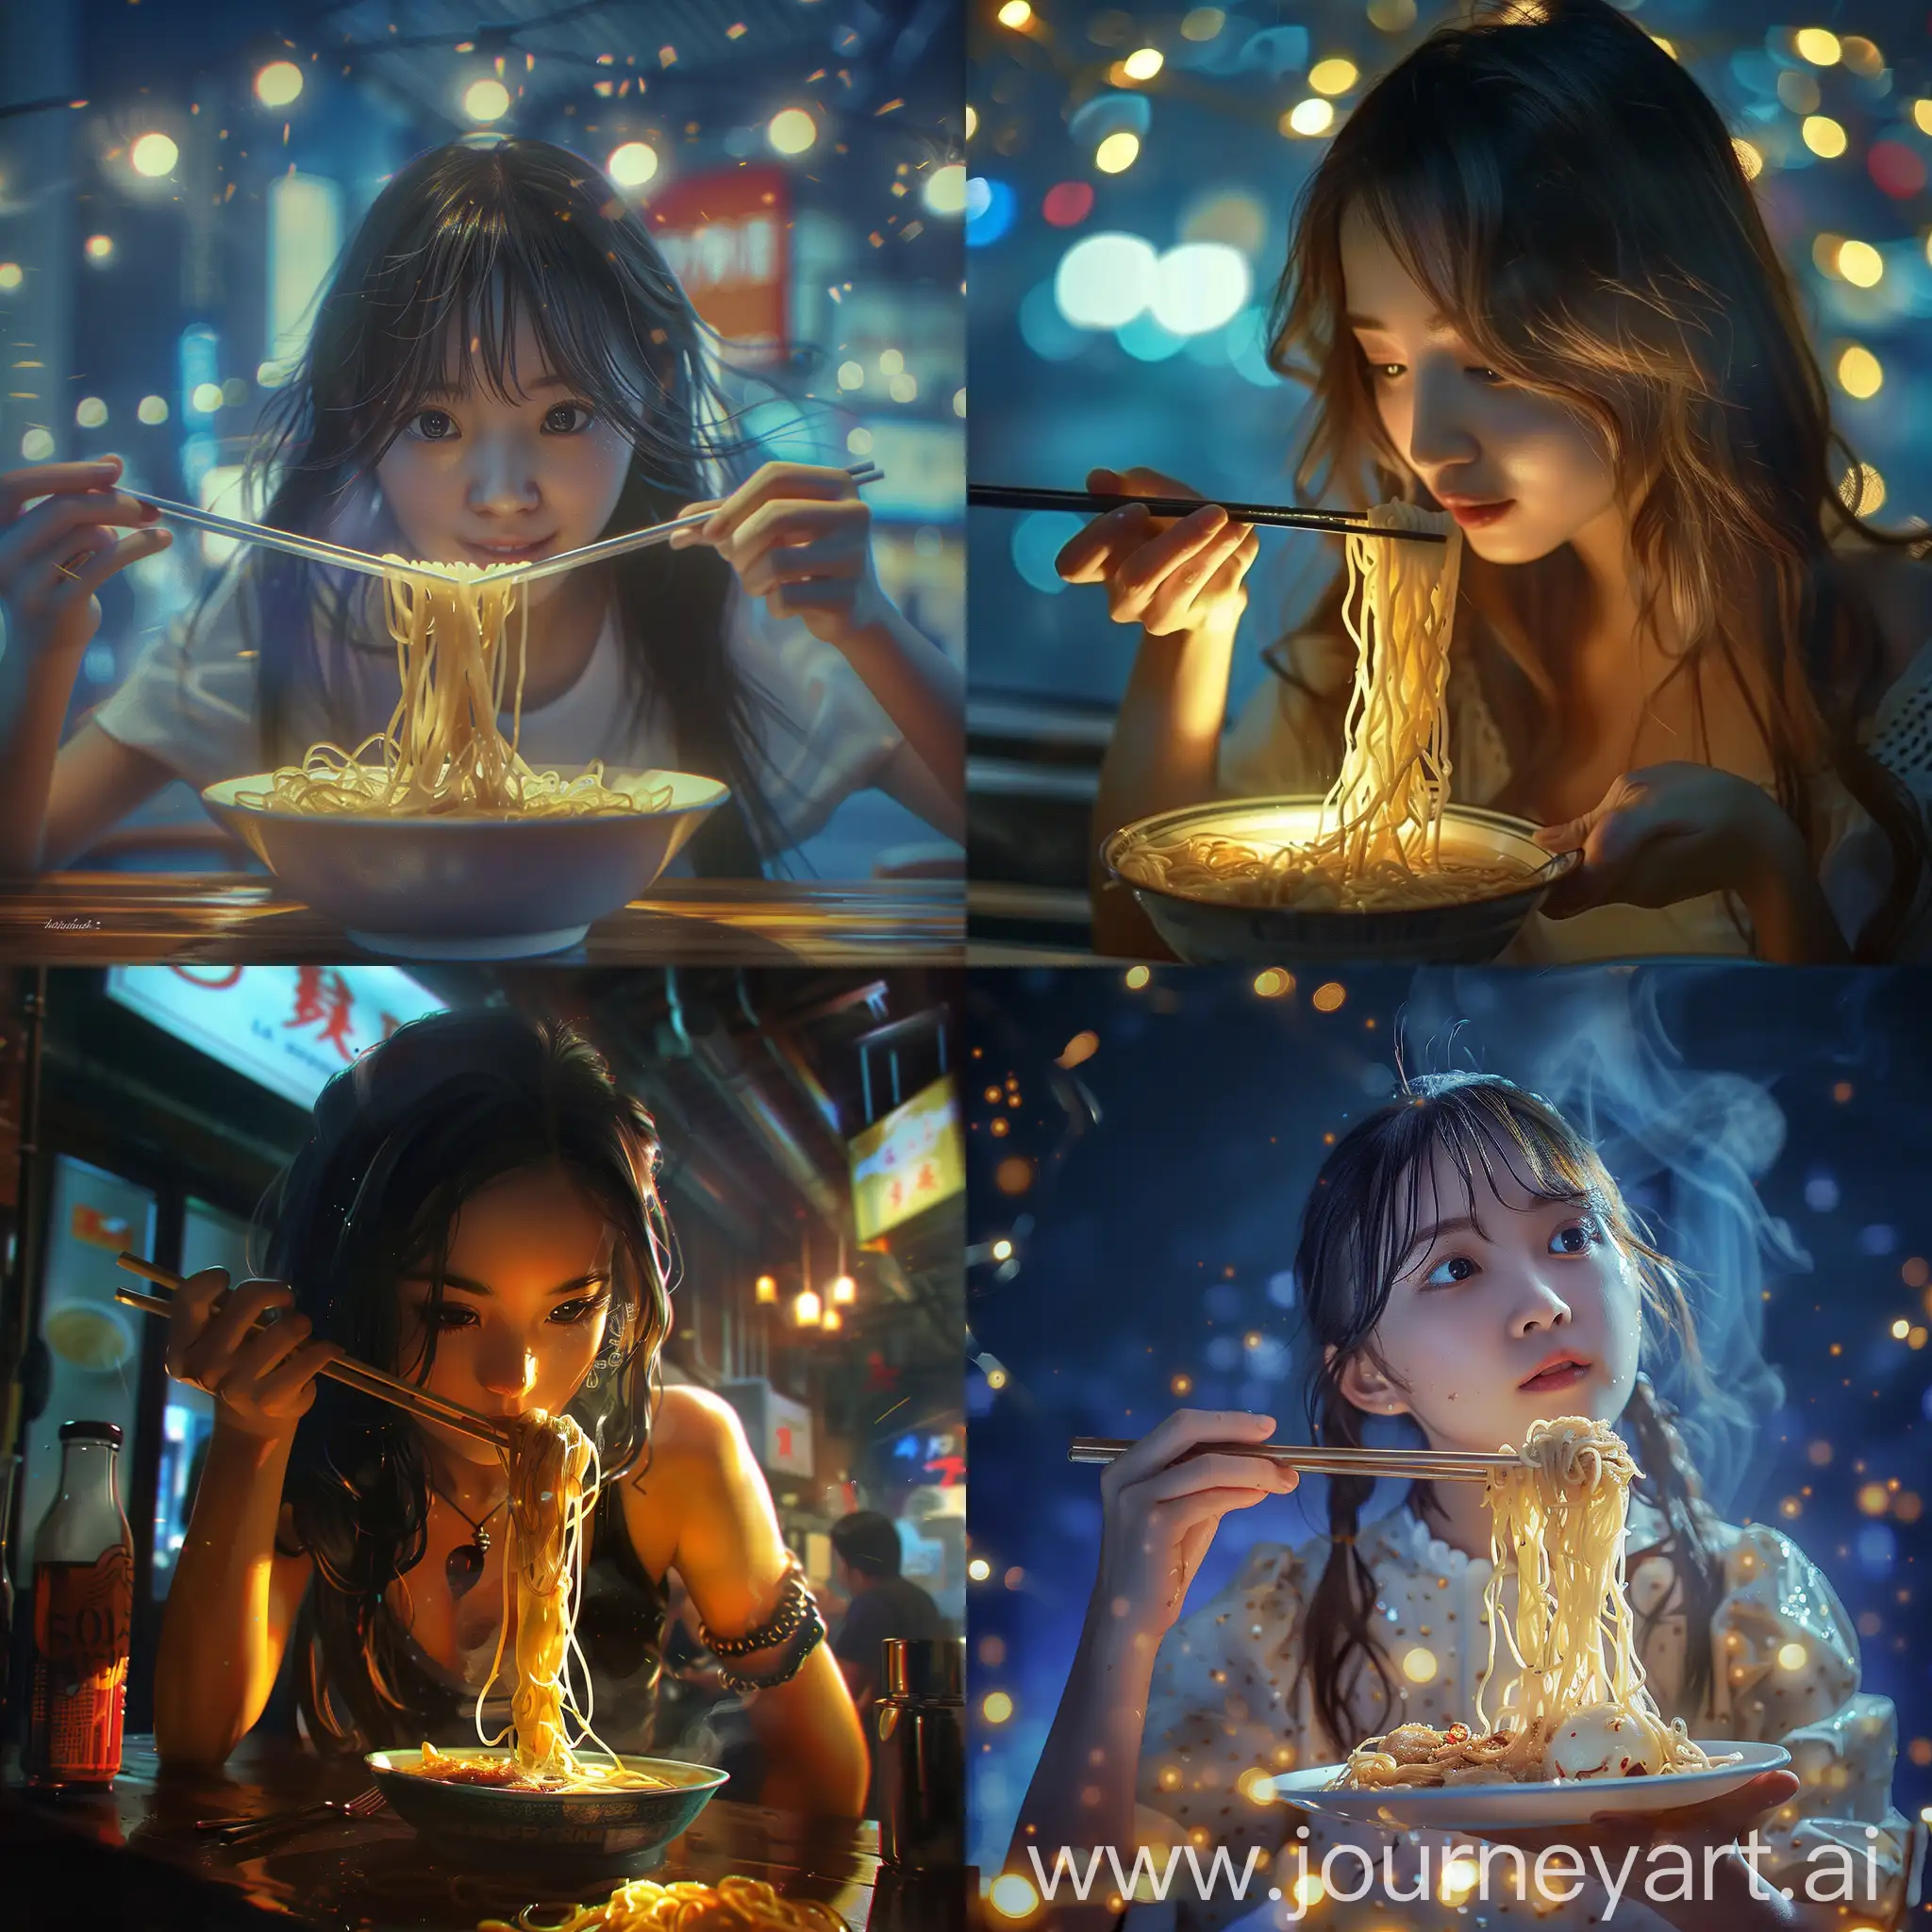 a girl is eating noodles, it looks very delicious, sharp focus, highly detailed, cinematic atmosphere, dynamic background, fine composition, vivid colors, elegant, intricate, confident, complex, hopeful, unique, epic, enhanced, glowing, shiny, rich deep color, best, light, novel, romantic, beautiful, symmetry, illuminated, strong, glorious, artistic, winning
